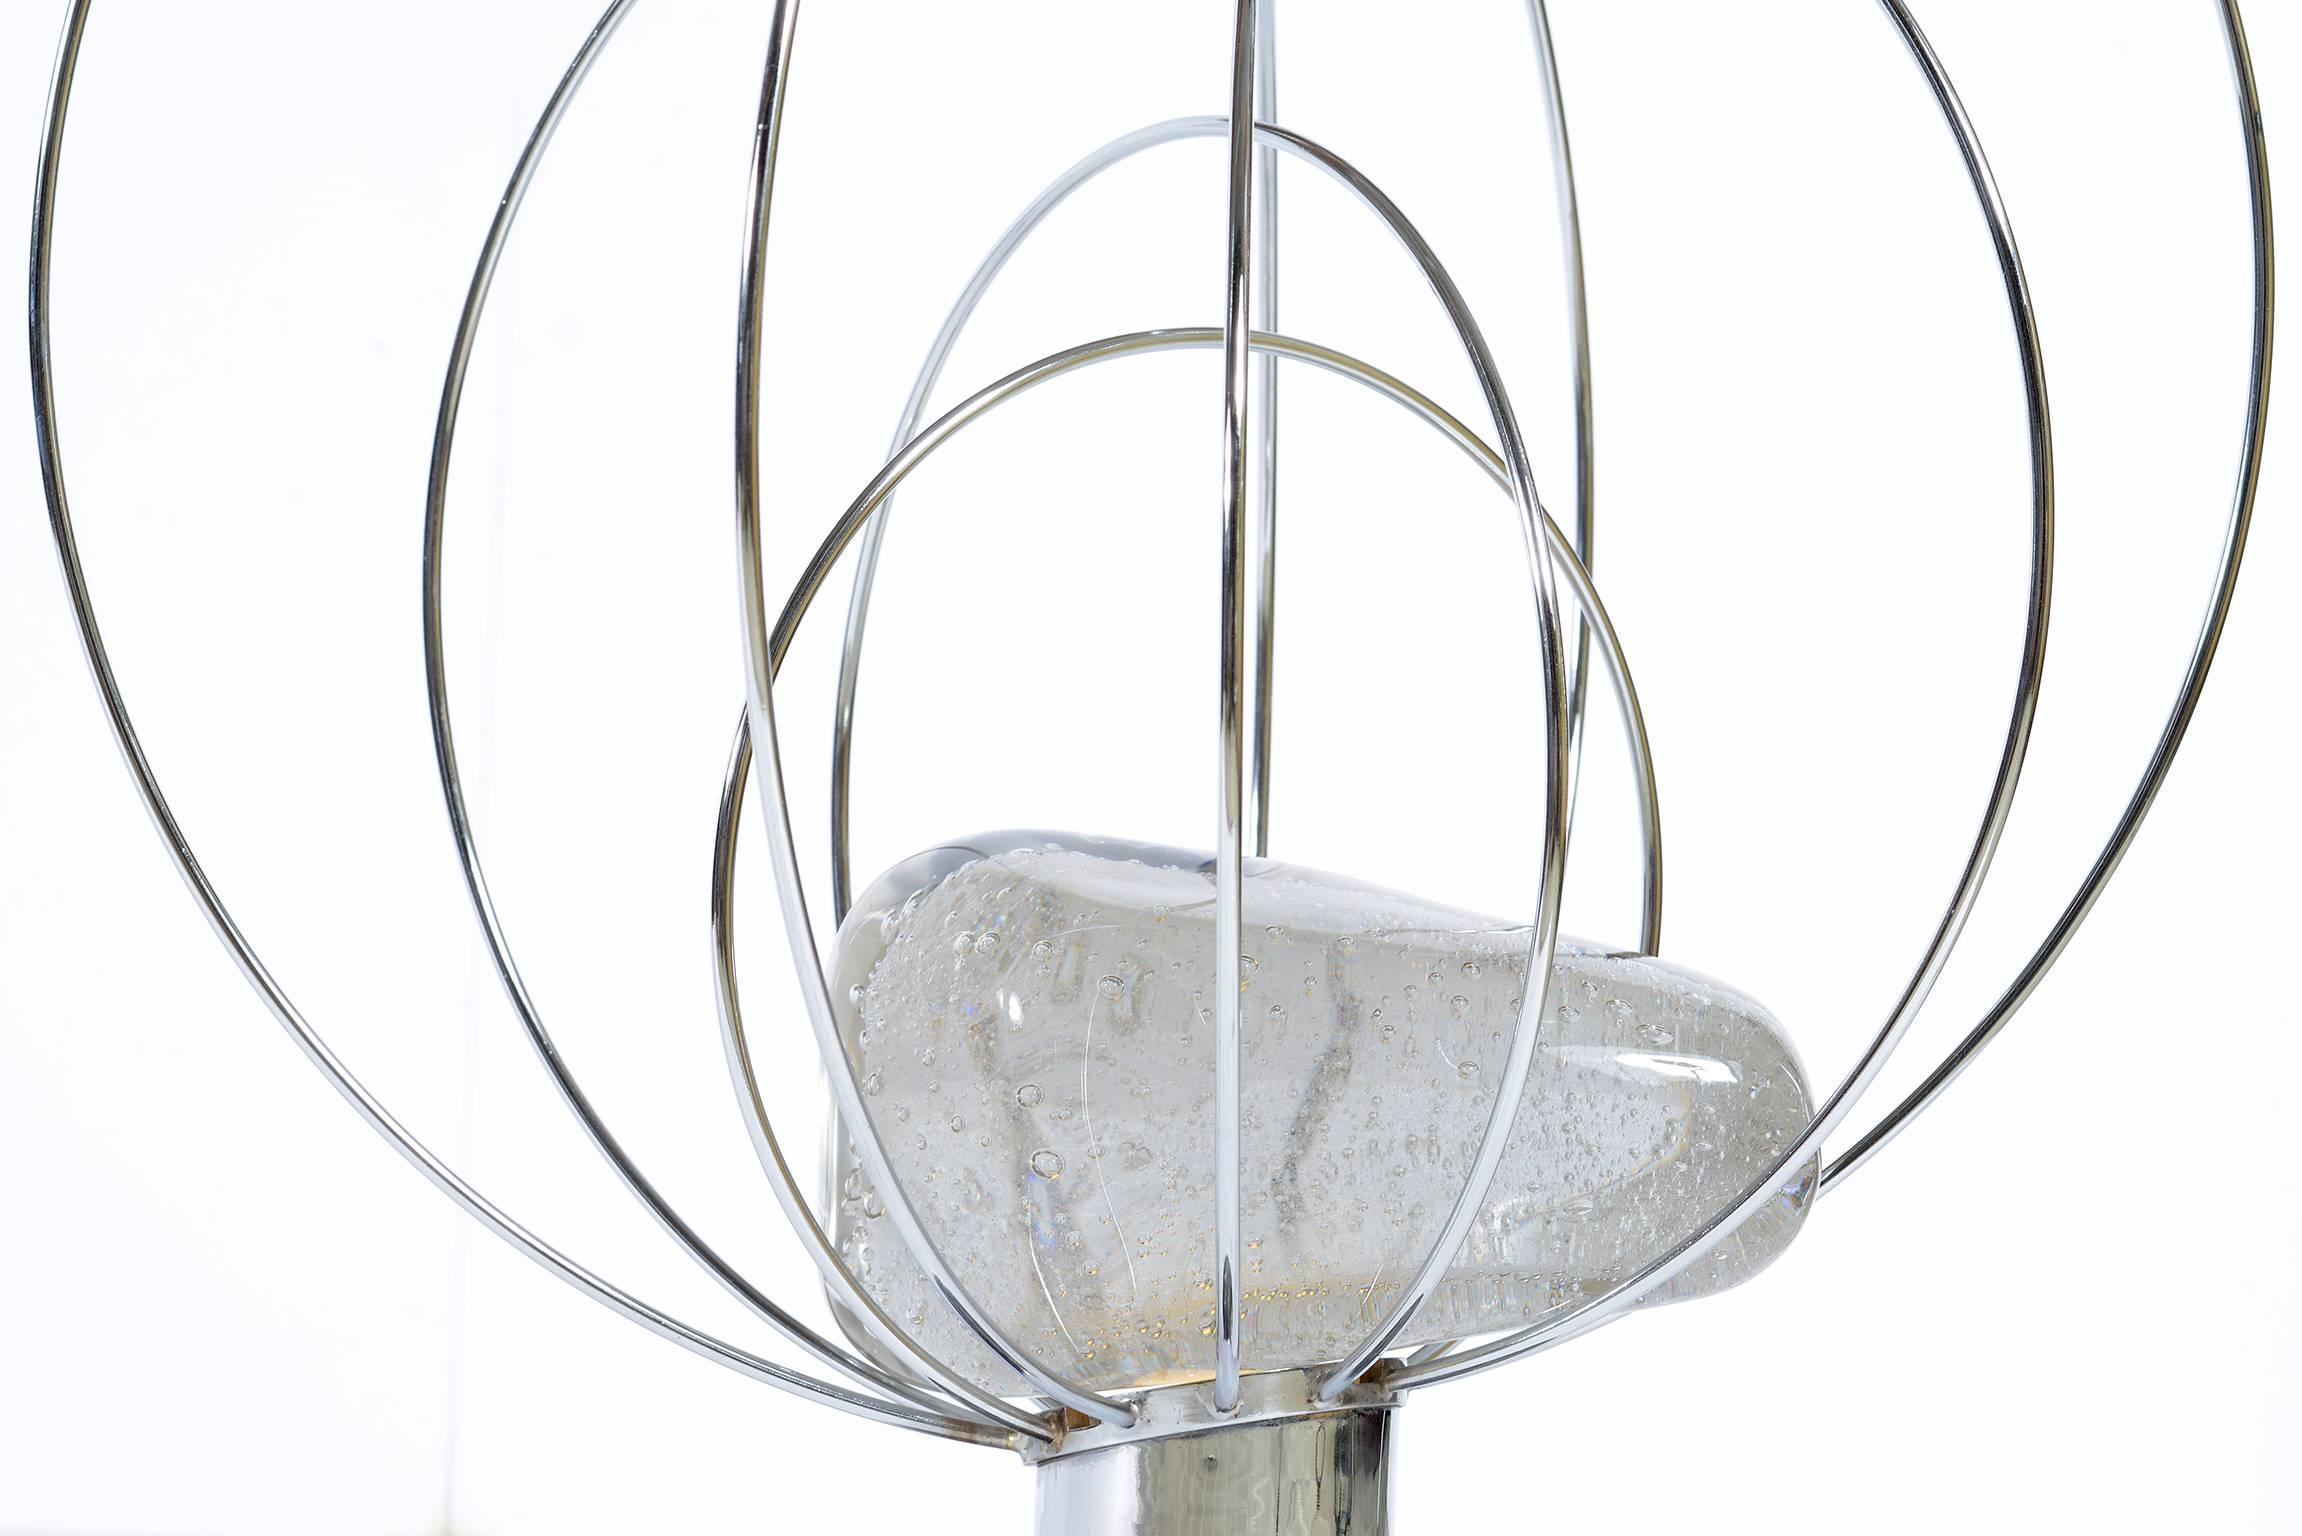 Mid-20th Century Angelo Brotto for Esperia Midcentury Modern chrome and Murano glass table lamp.